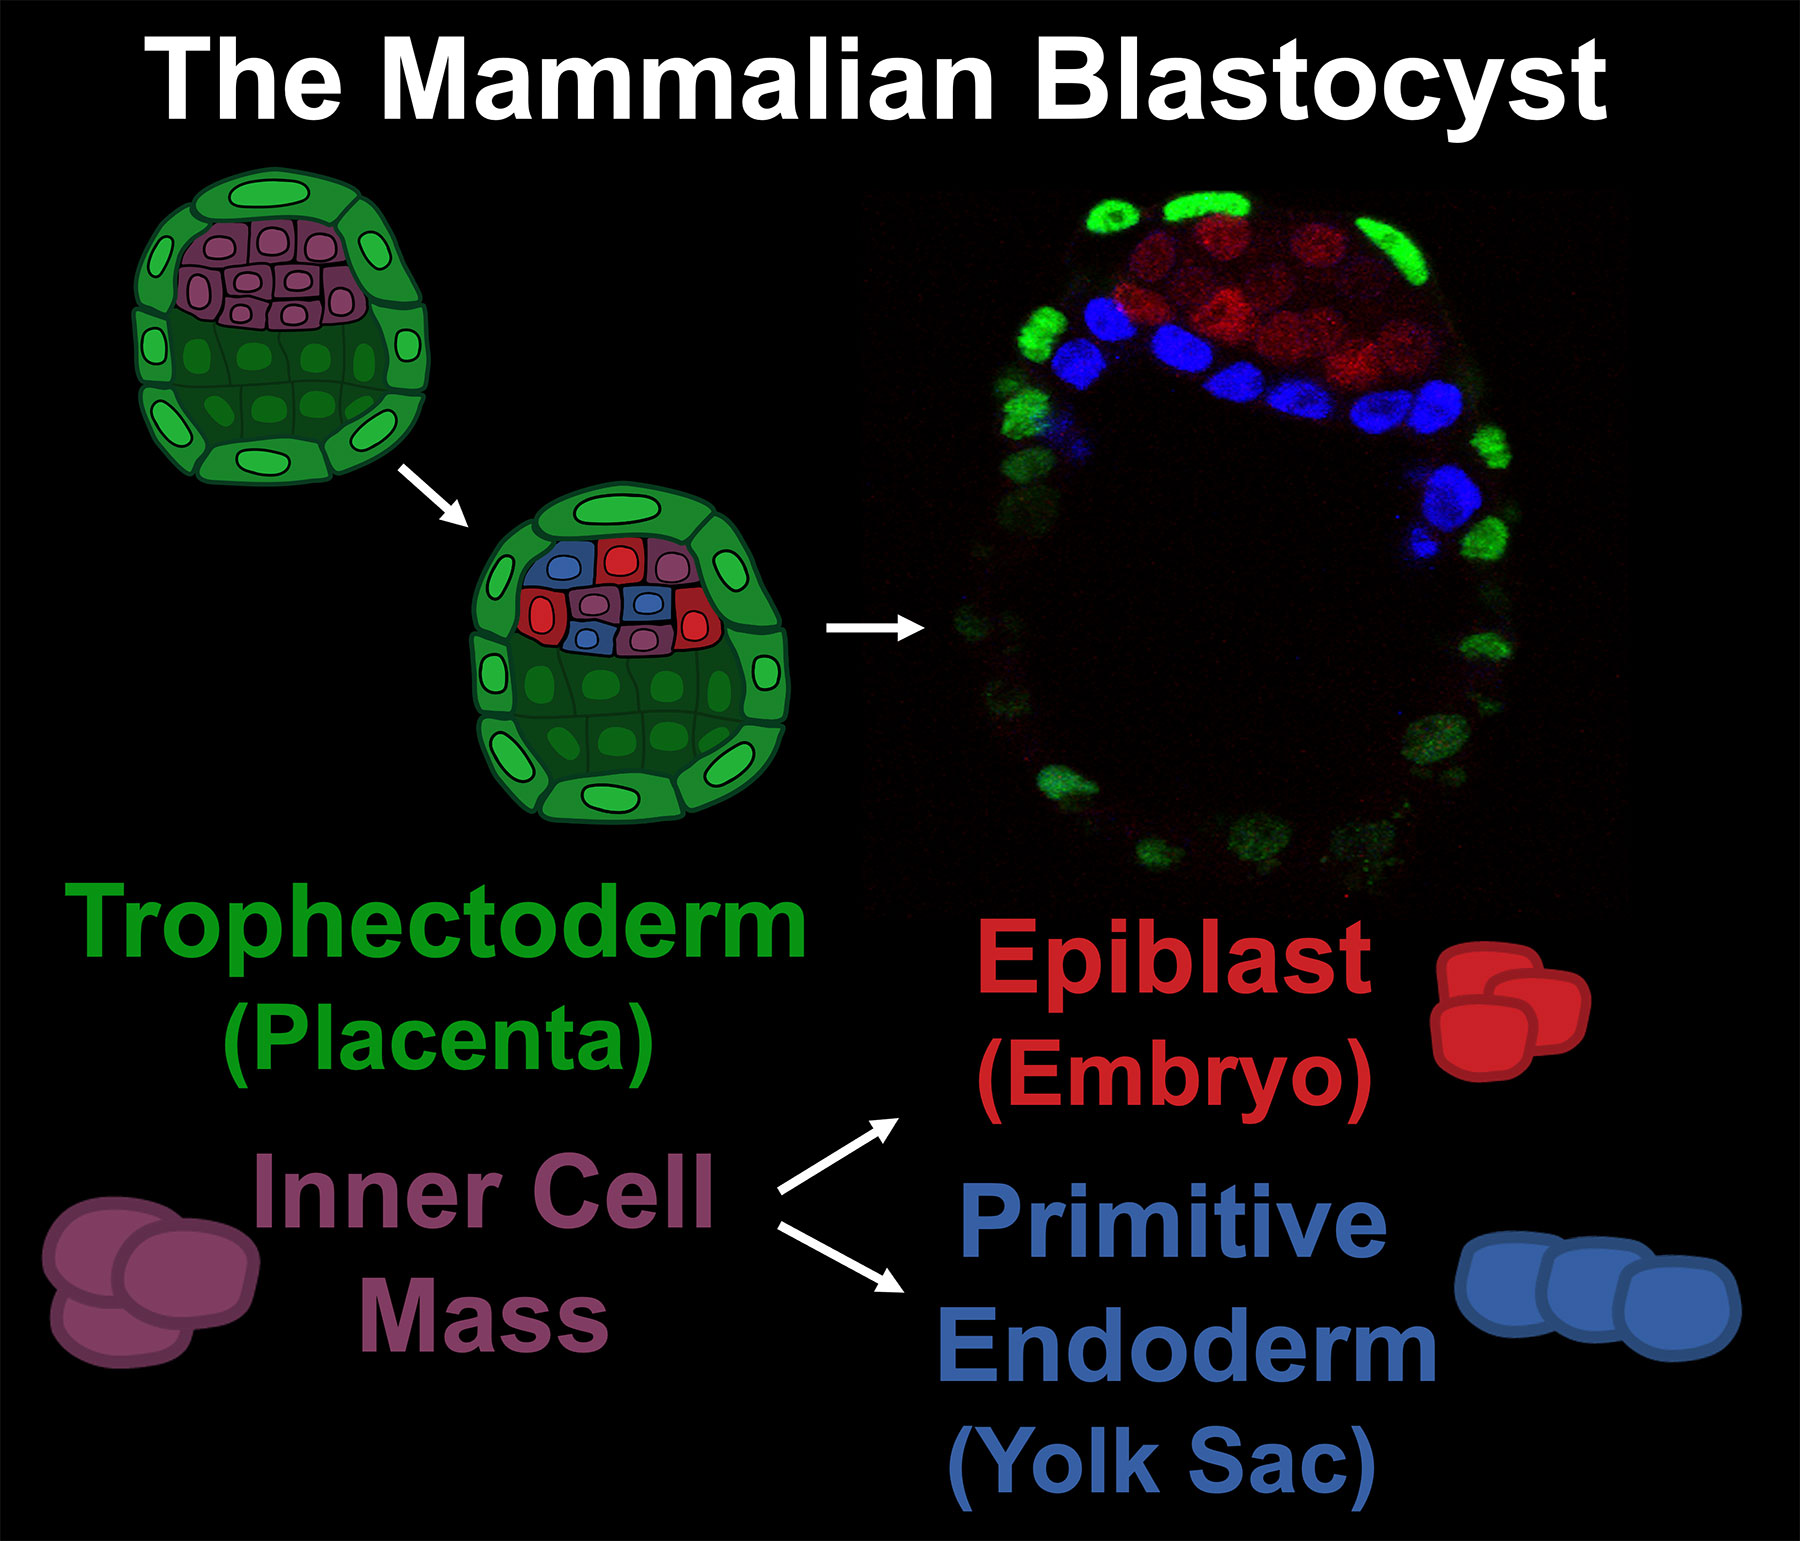 Image shows scheme of how the mammalian blastocyst is formed and how ICM cells give rise to Epiblast and Primitive Endoderm.